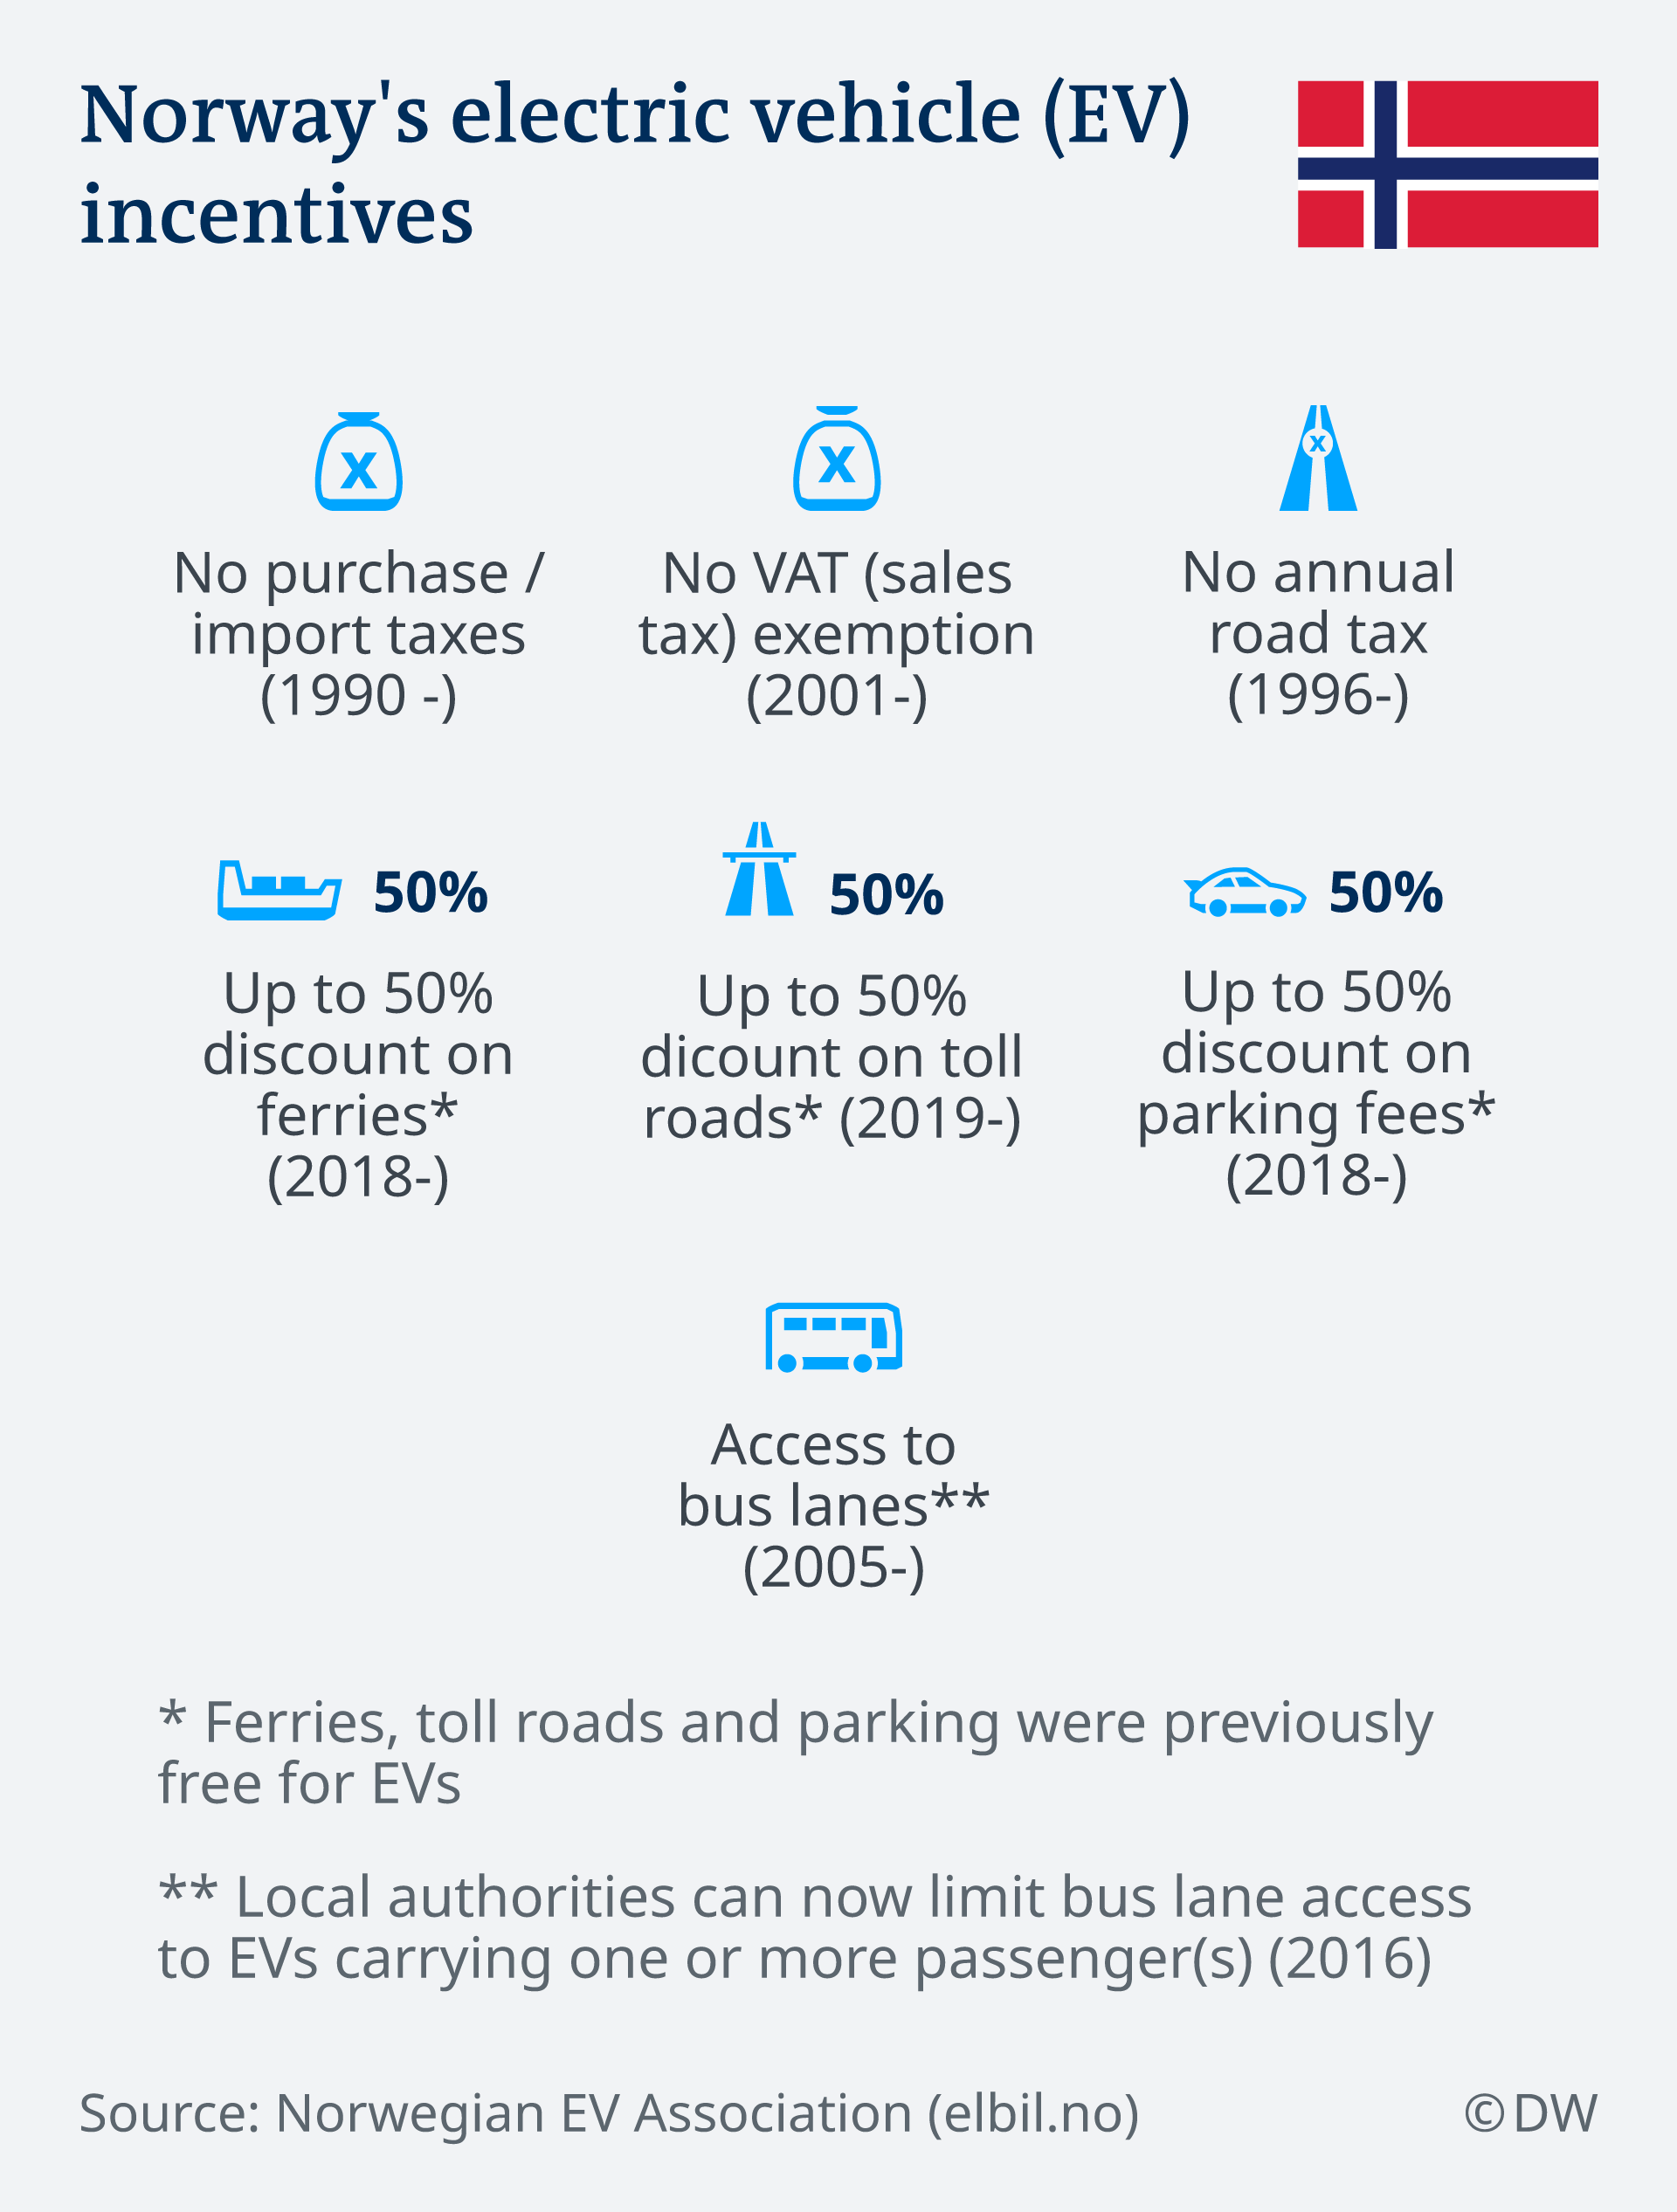 Norway's electric vehicle (EV) incentives